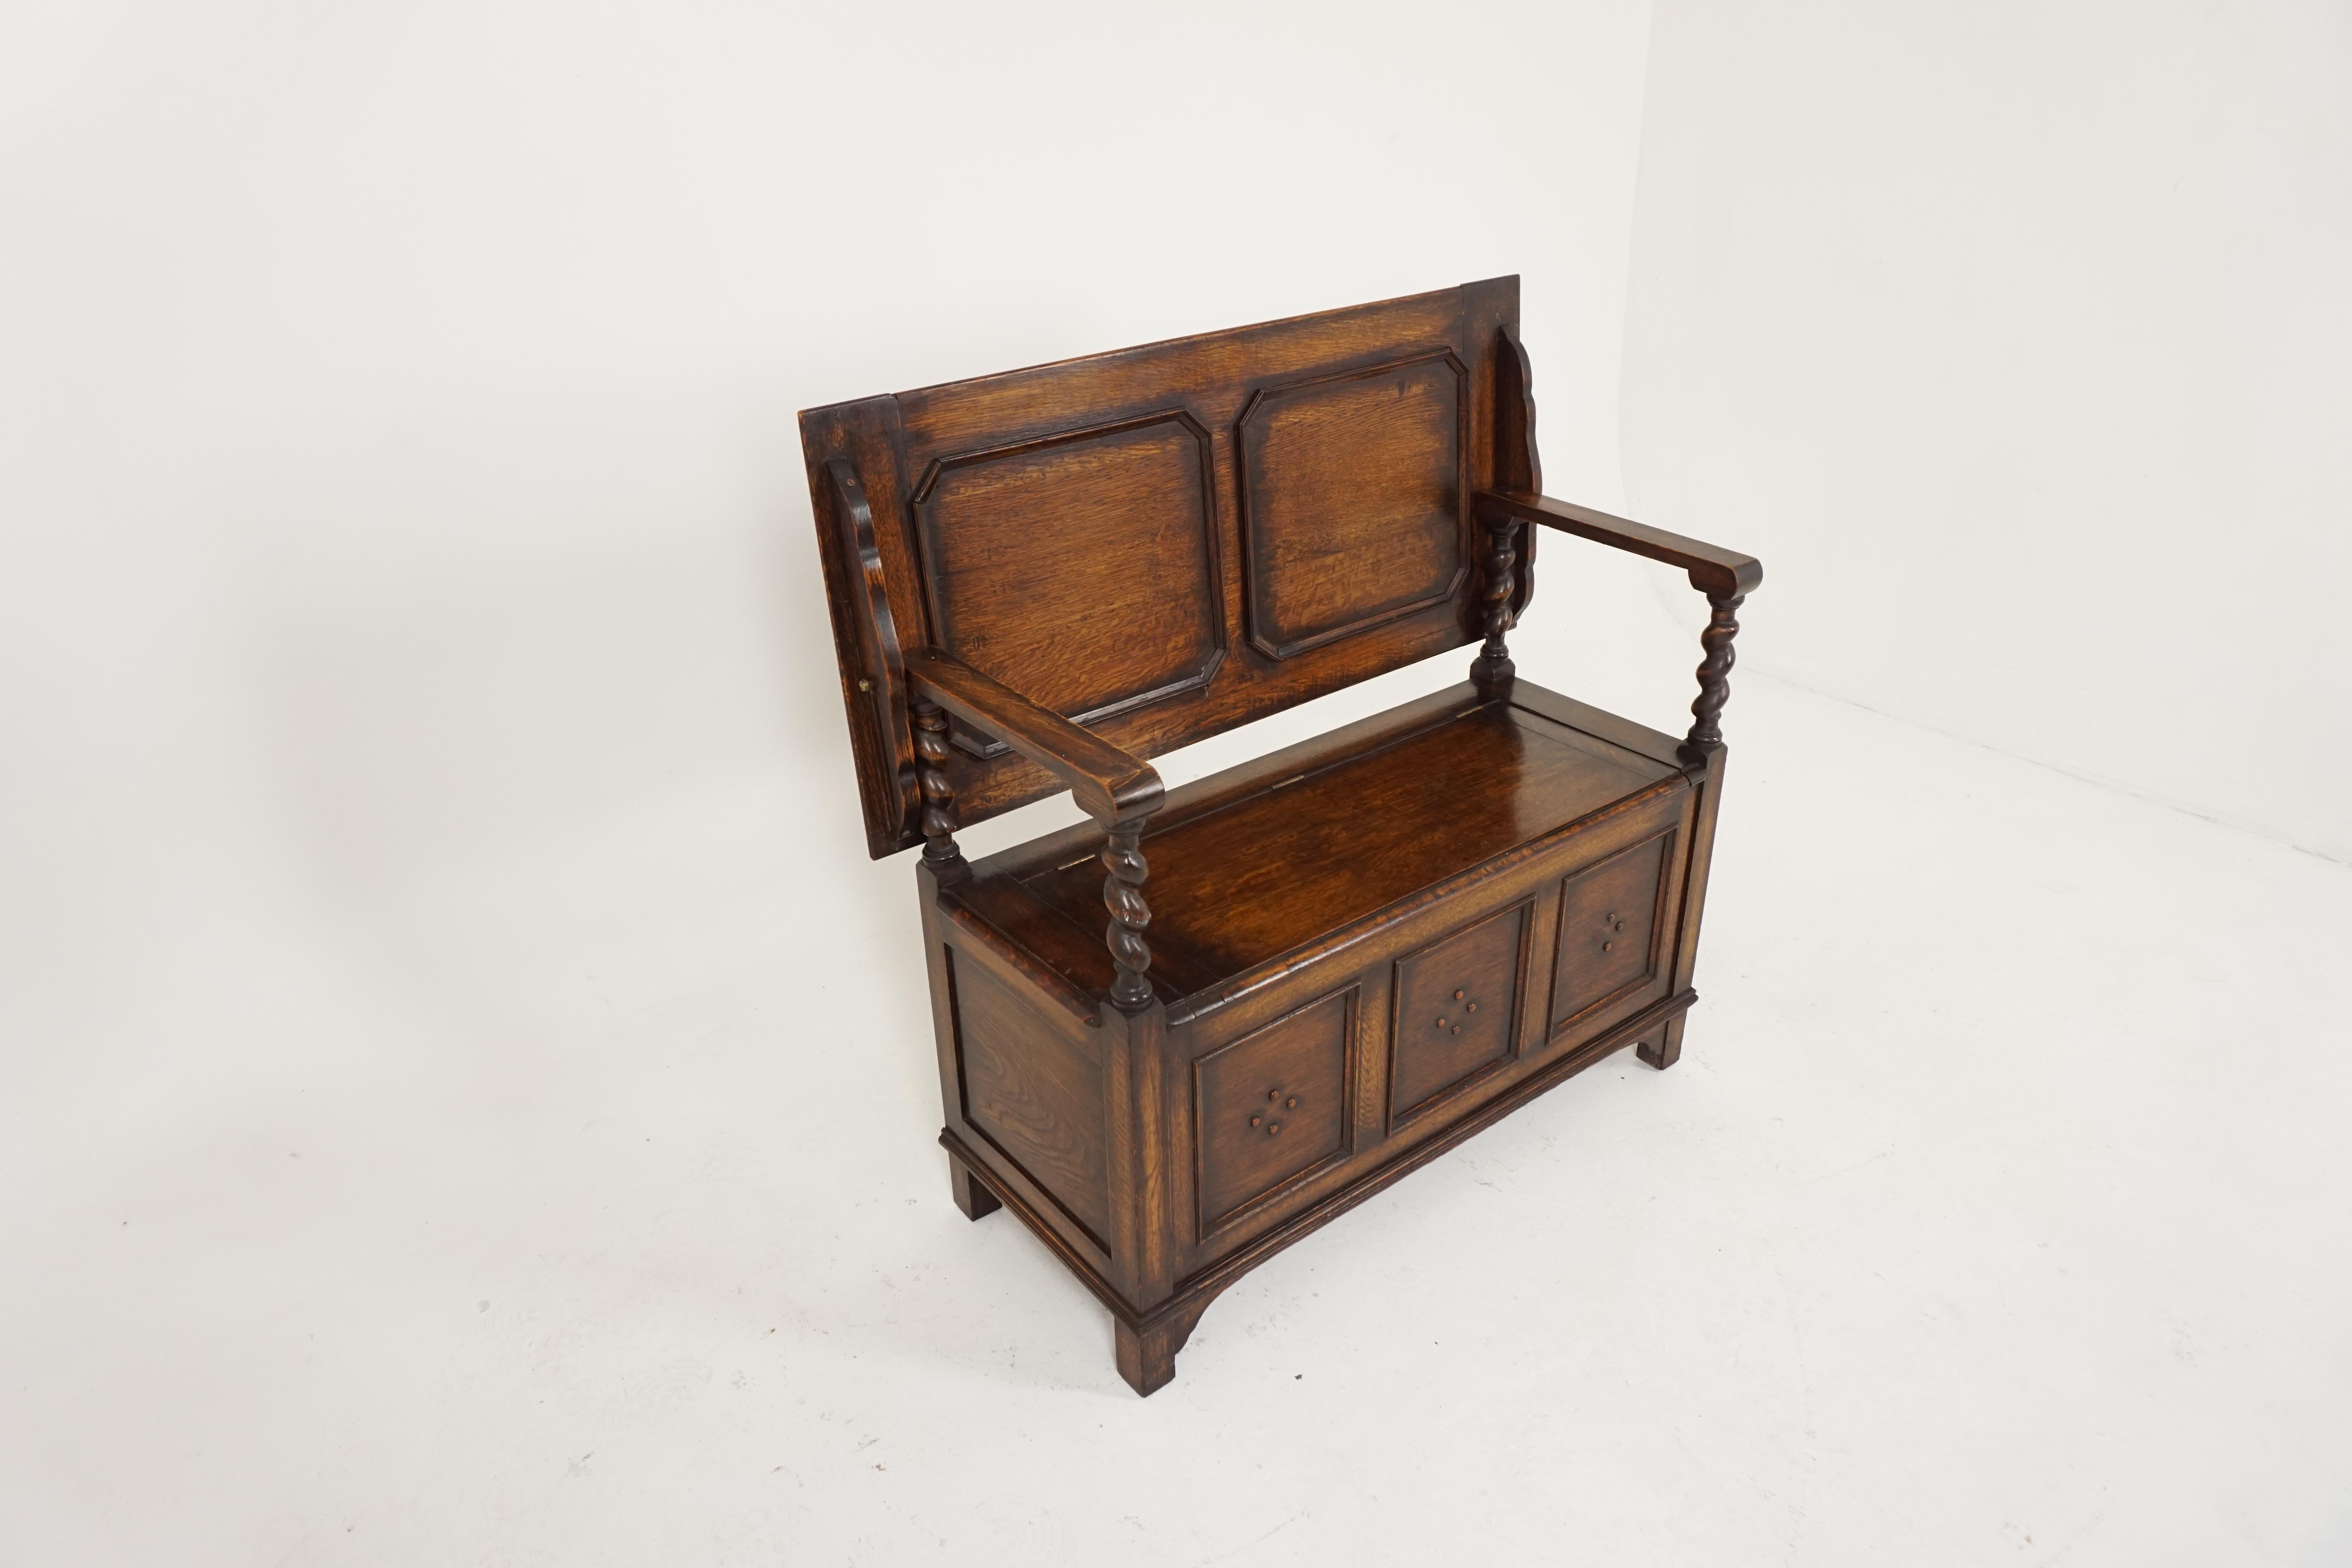 Antique monks bench, carved oak hall seat or settle bench, antique furniture, Scotland 1910, B1848

Scotland, 1910
Solid oak construction
Original finish
Paneled oak back with solid oak arm rests with barley twist supports
The seat lifts for